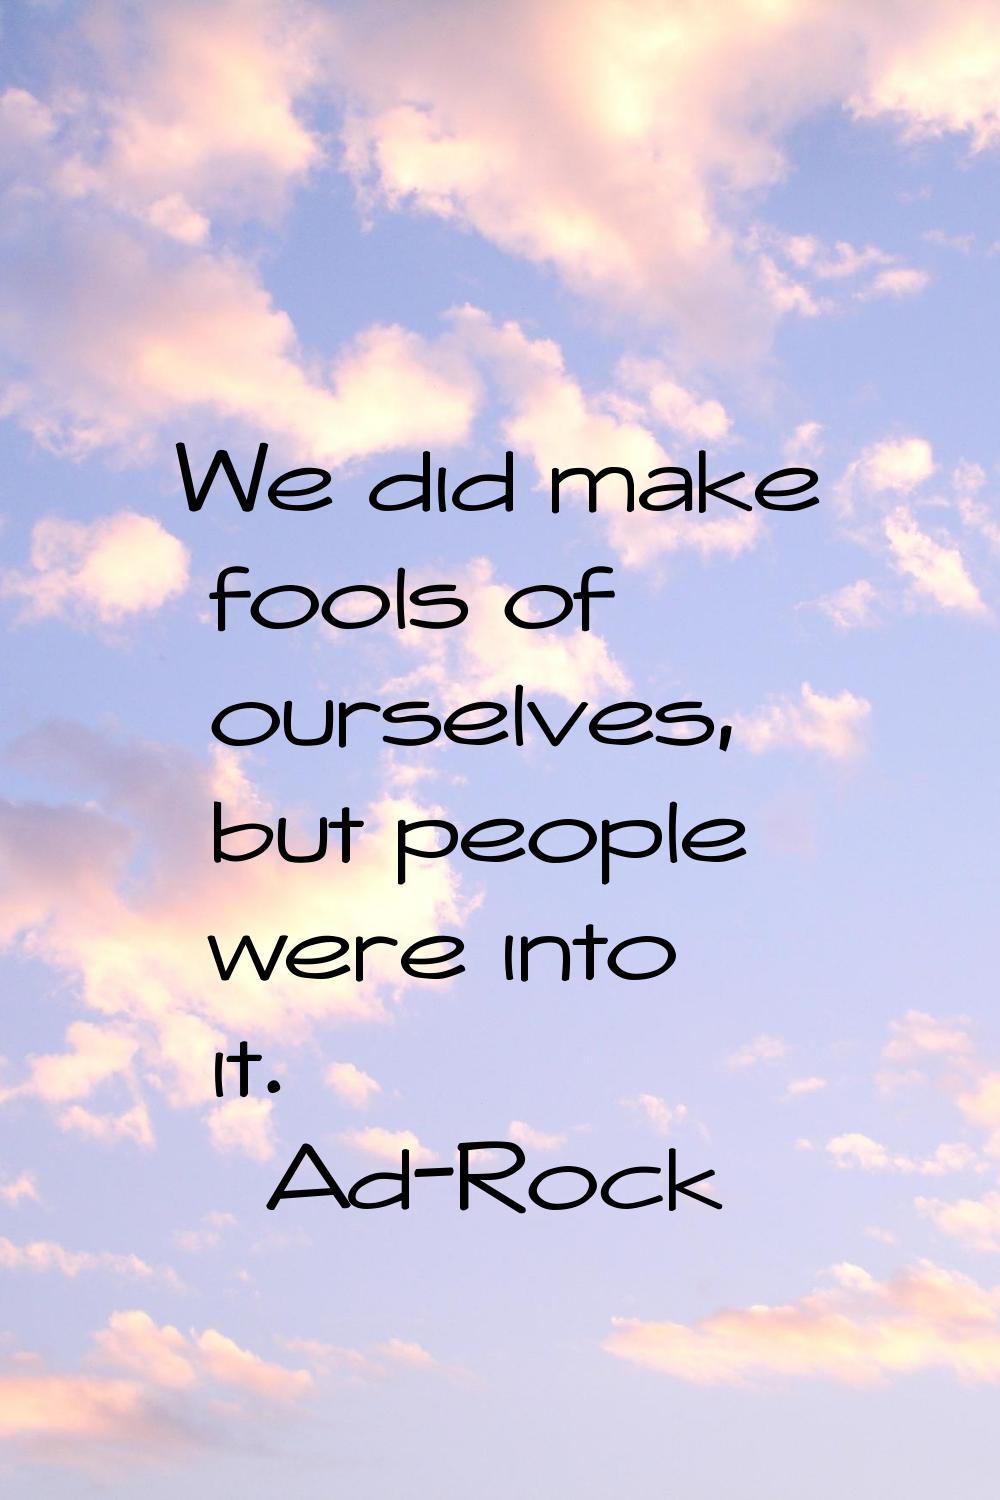 We did make fools of ourselves, but people were into it.